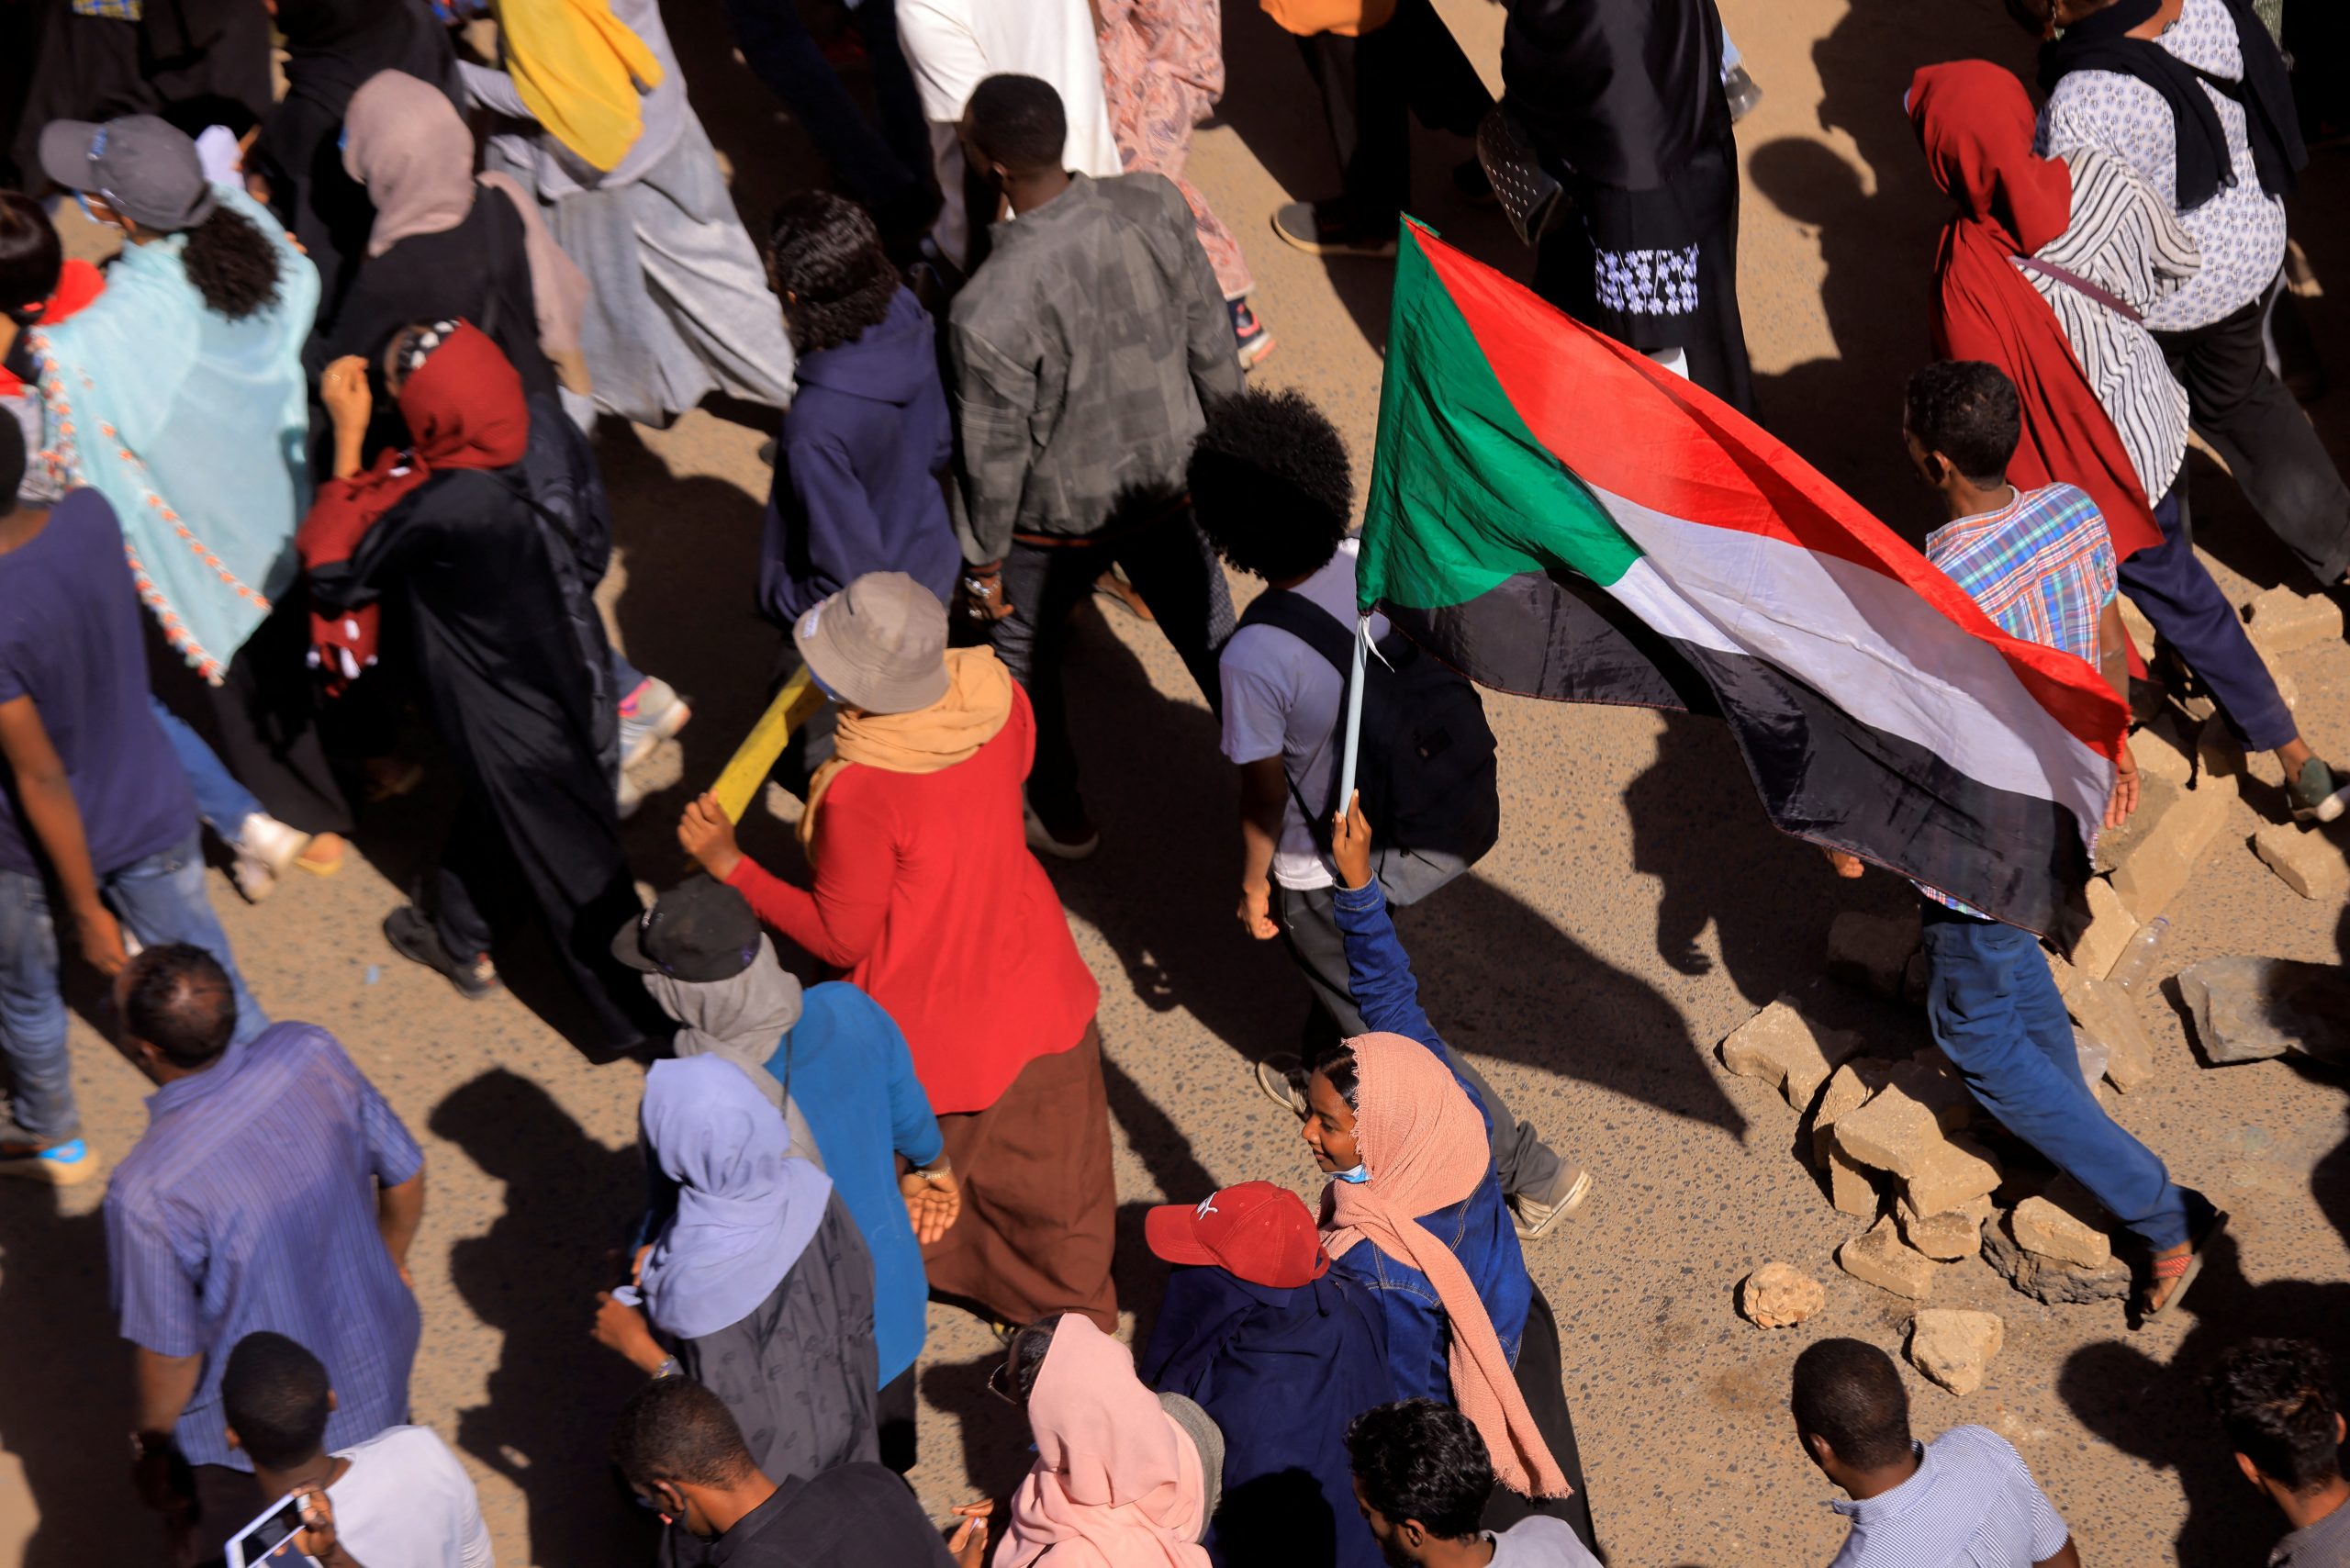 New Report Sets Out Approach Needed to Pull Sudan’s Democratic Transition Back from the Brink